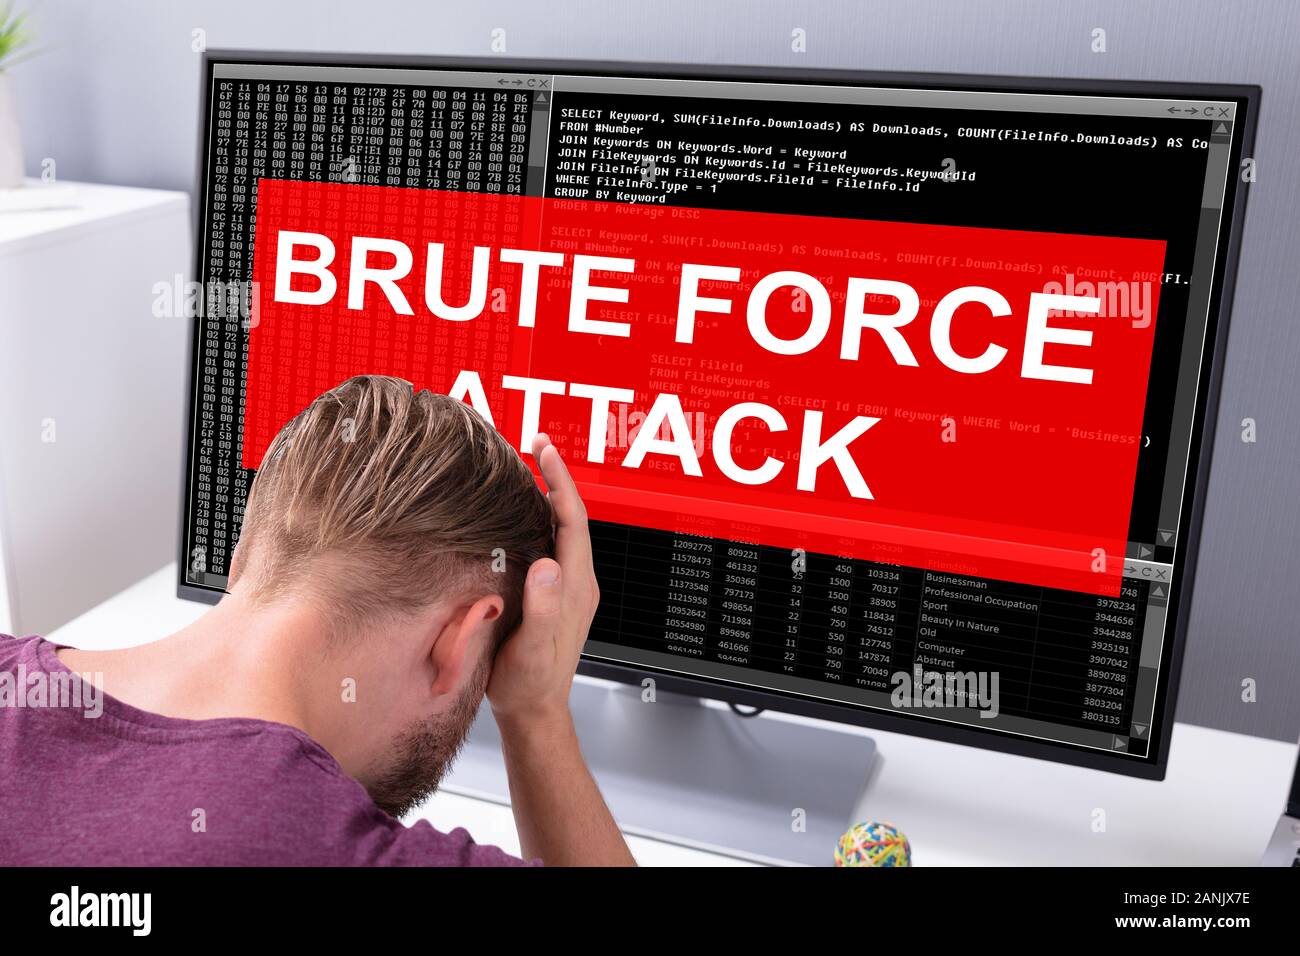 Sider View Of An Upset Businessman Looking At Computer Screen With Brute Force Attack Message Stock Photo